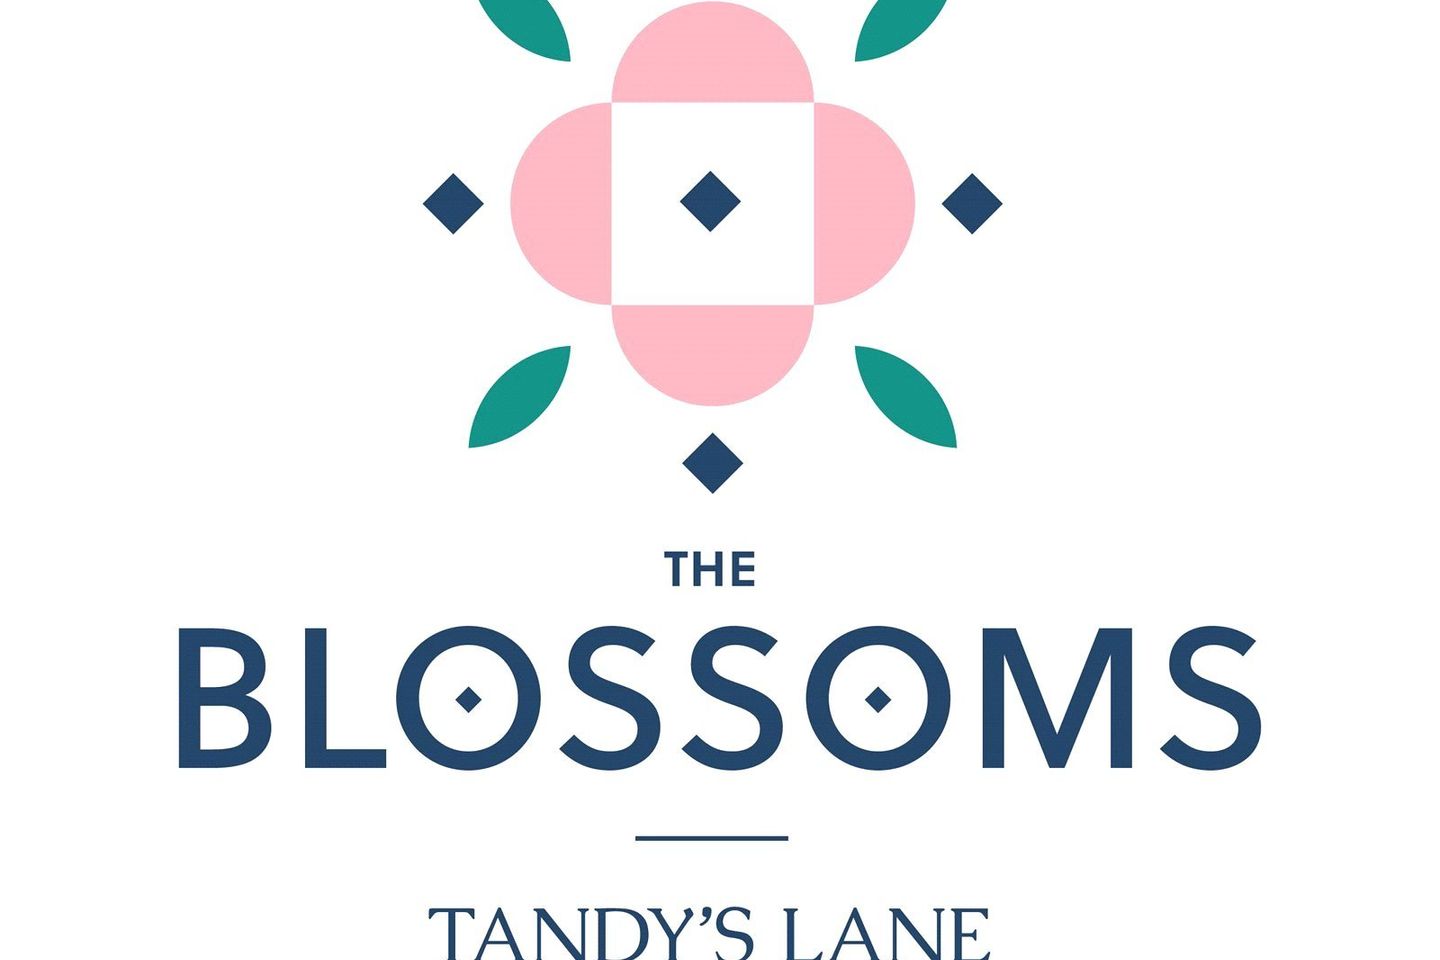 4 Bedroom House, The Blossoms At Tandy's Lane, 4 Bedroom House, The Blossoms At Tandy's Lane, Adamstown, Lucan, Co. Dublin